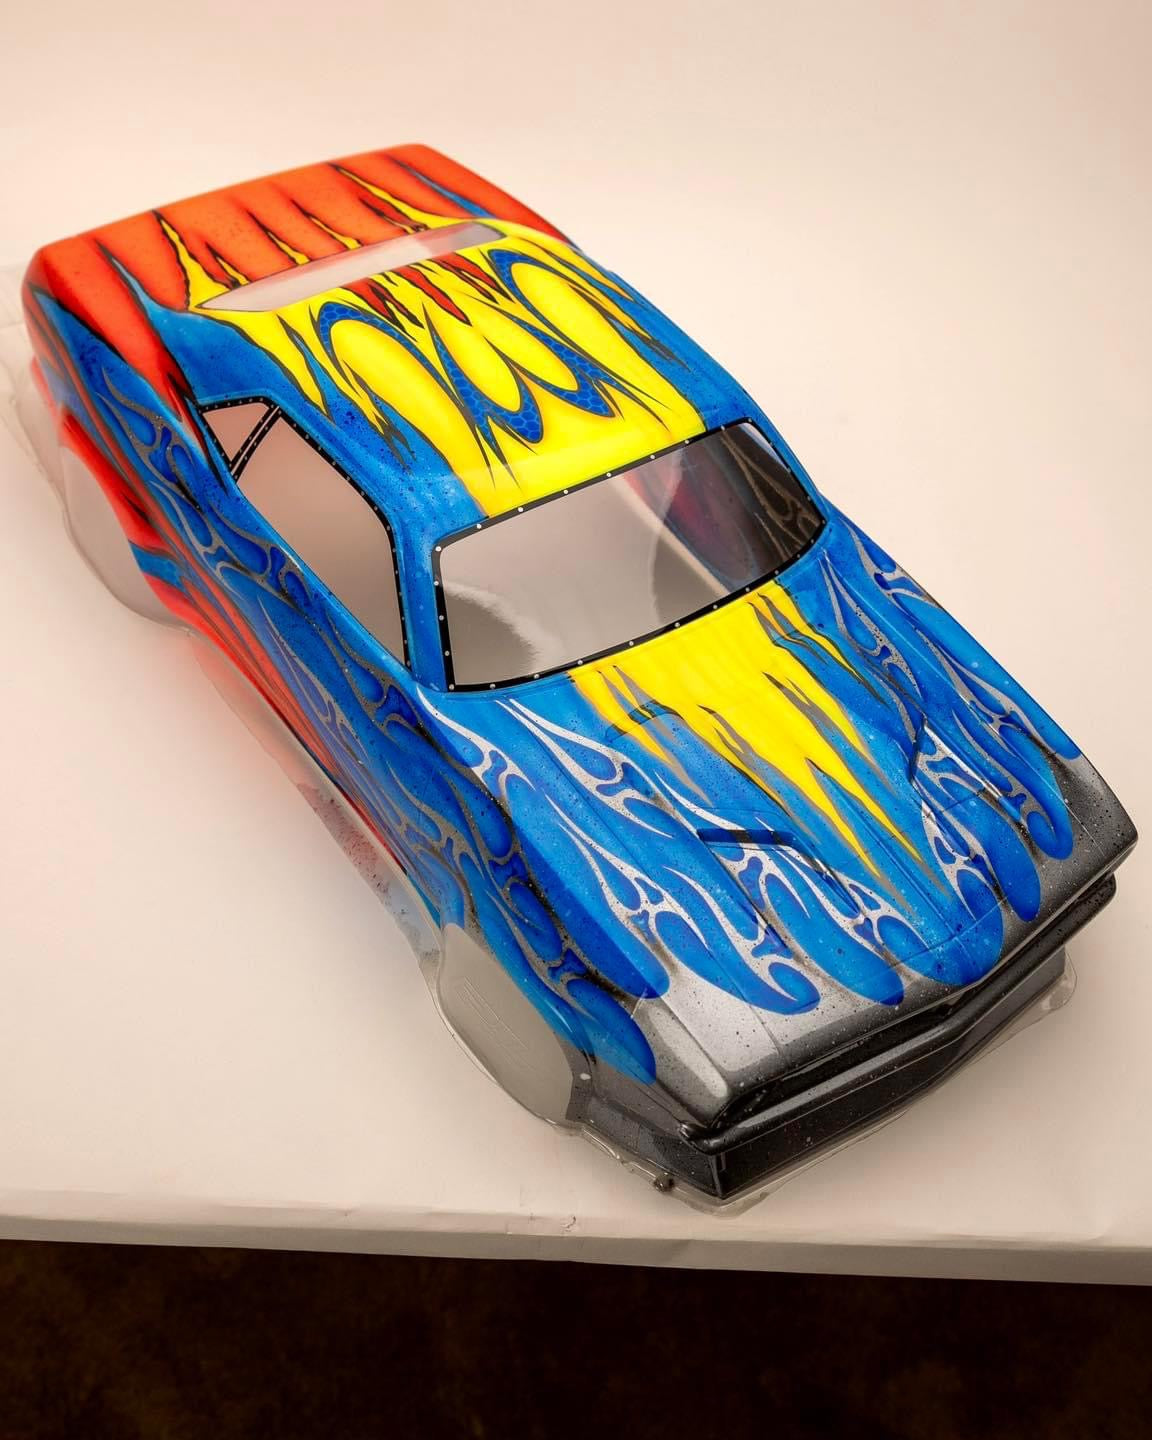 VOTE for the Body to go on our drag car!